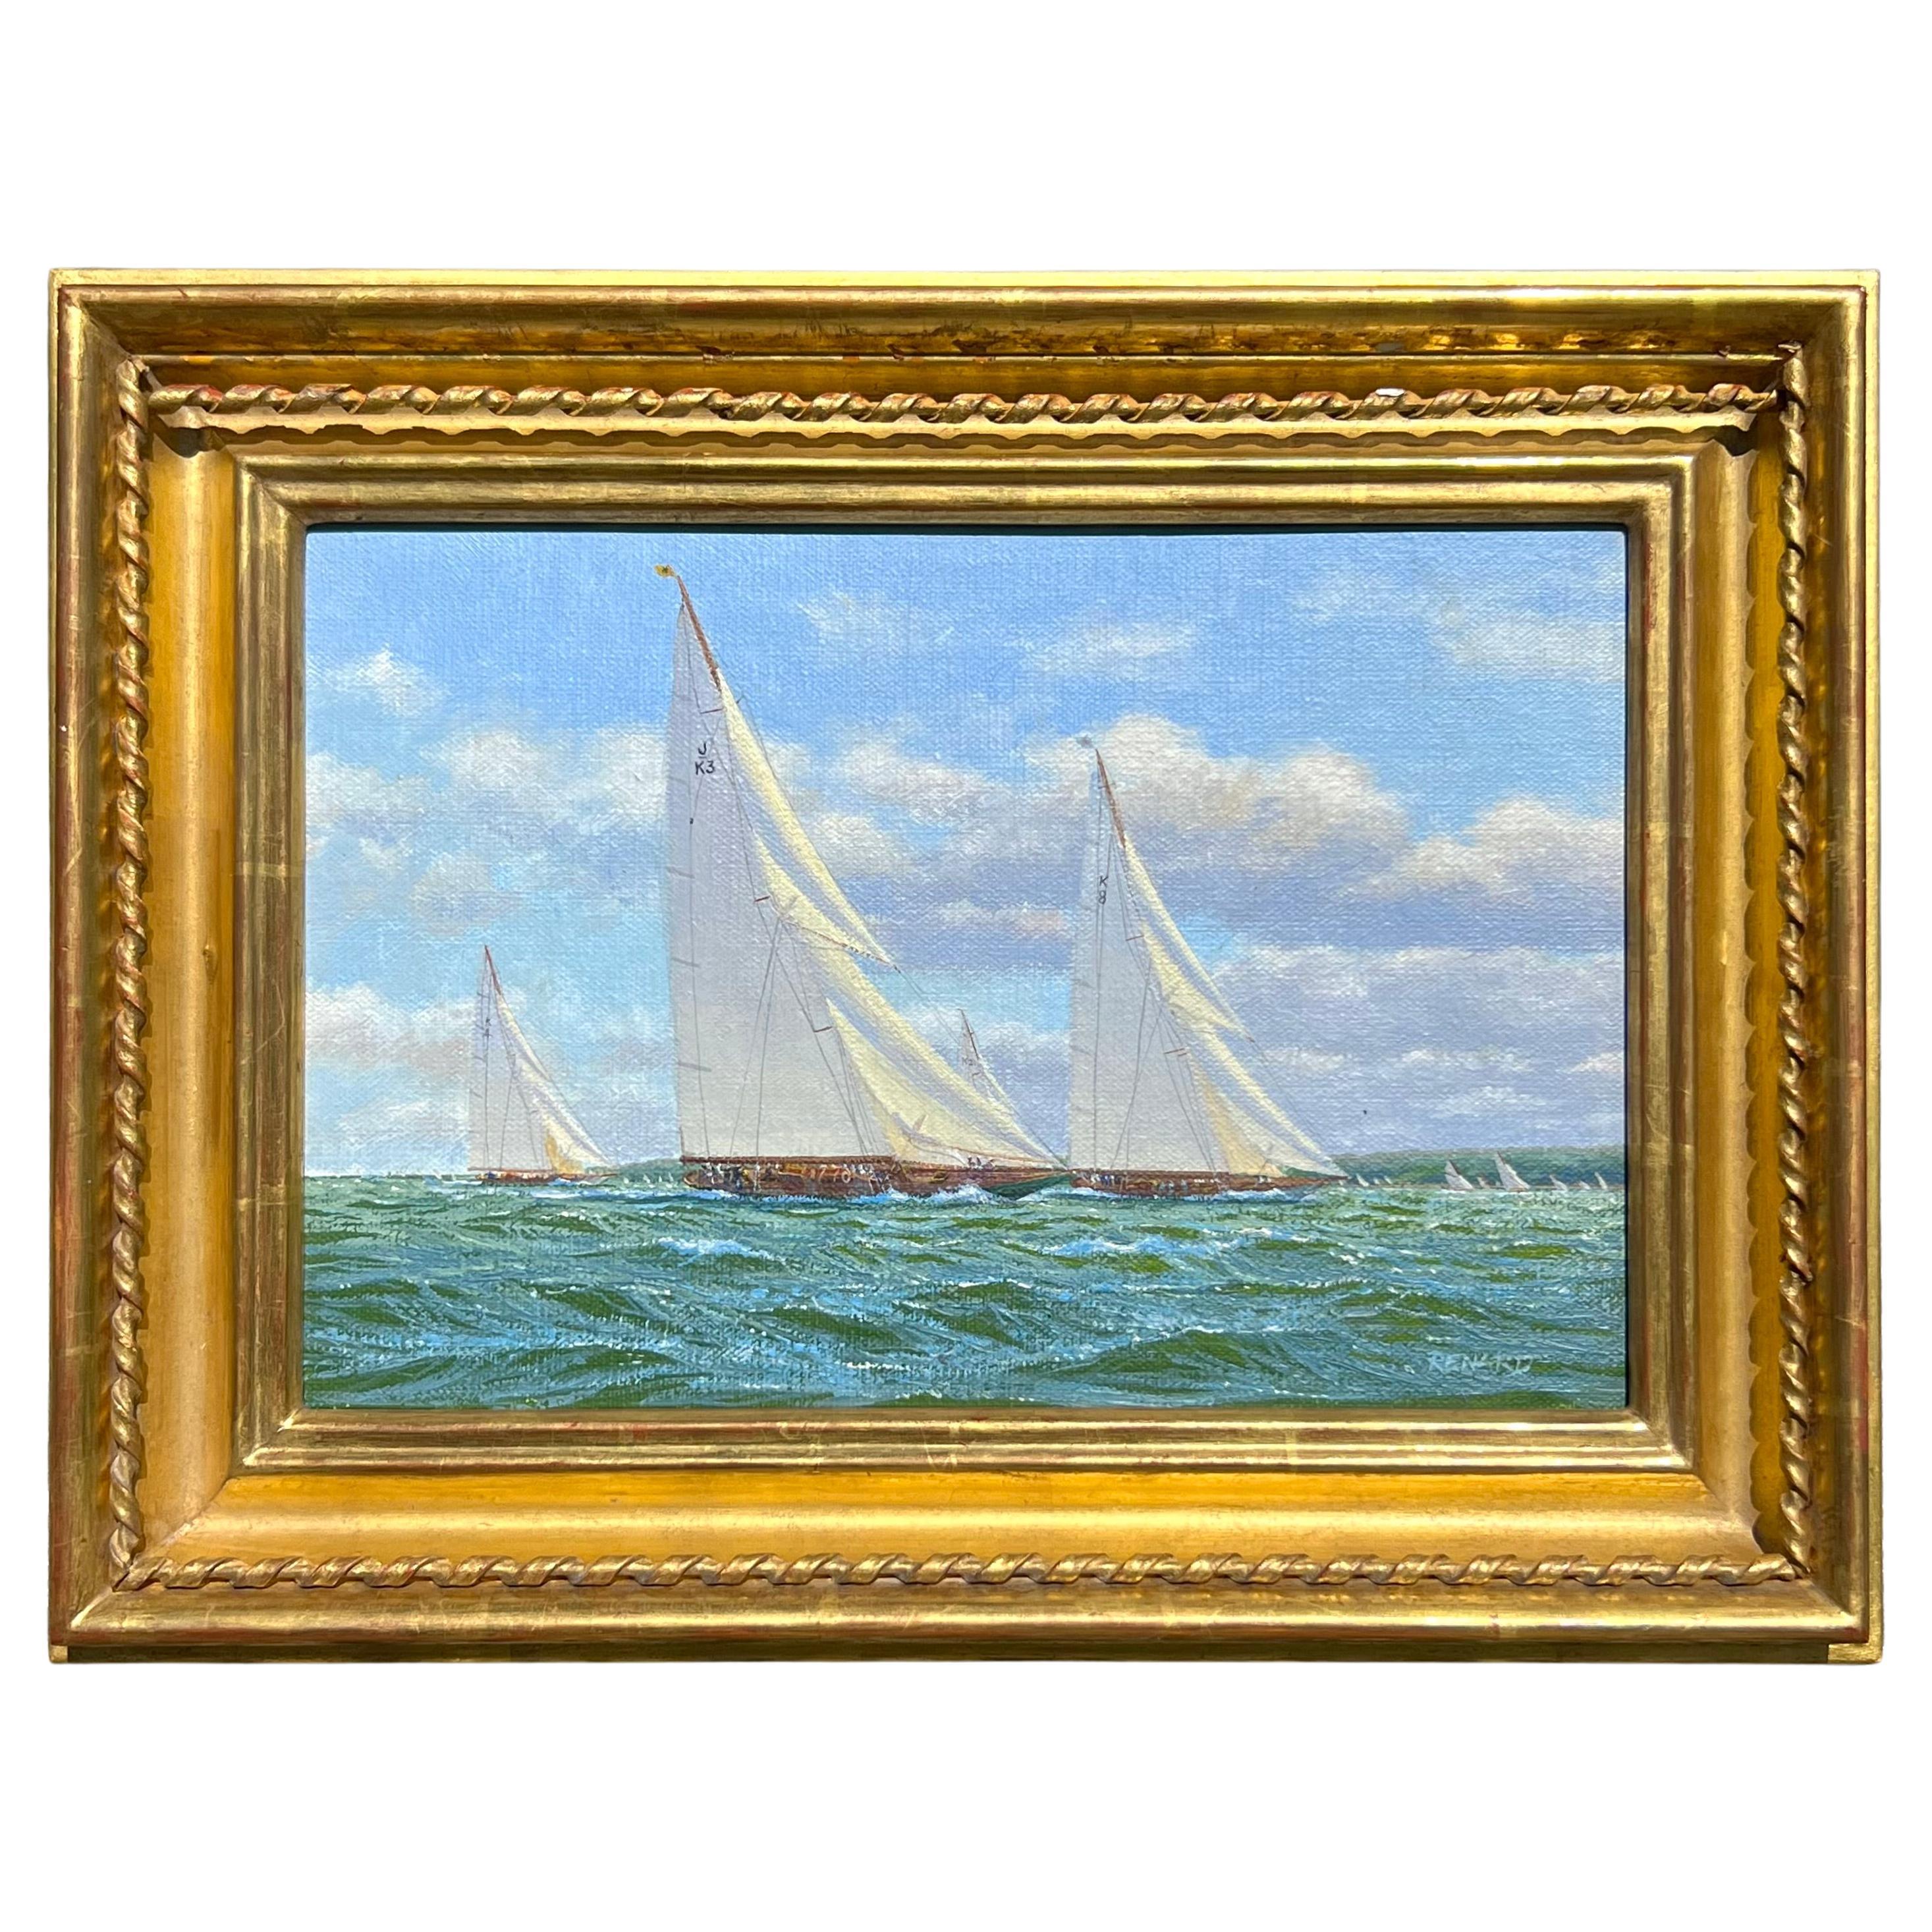 "Yachts Racing off the Coast" an Oil Painting by Stephen Renard For Sale